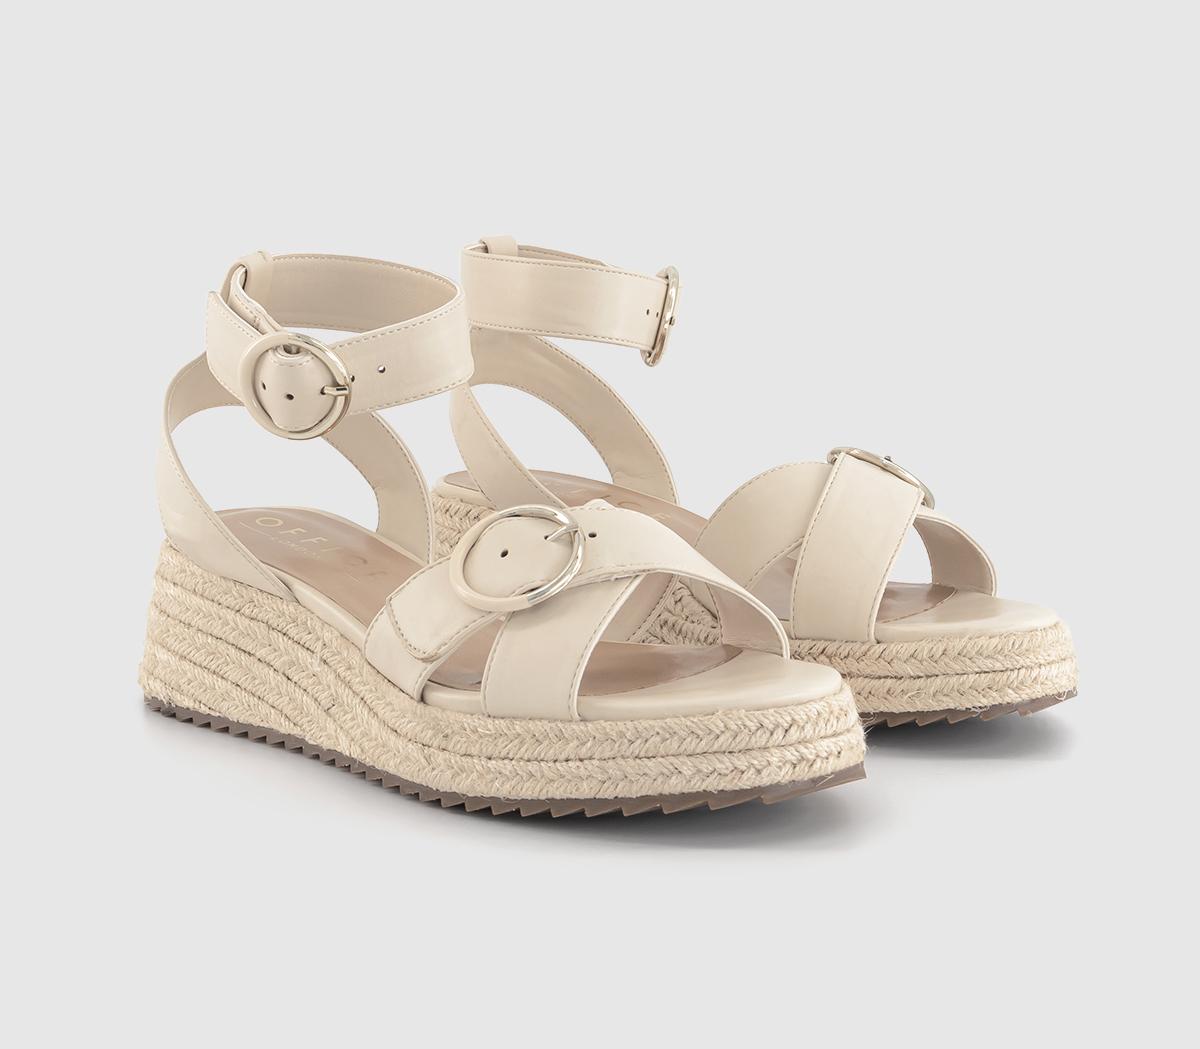 OFFICE Womens Marcella Double Buckle Espadrille Wedges Off White, 7